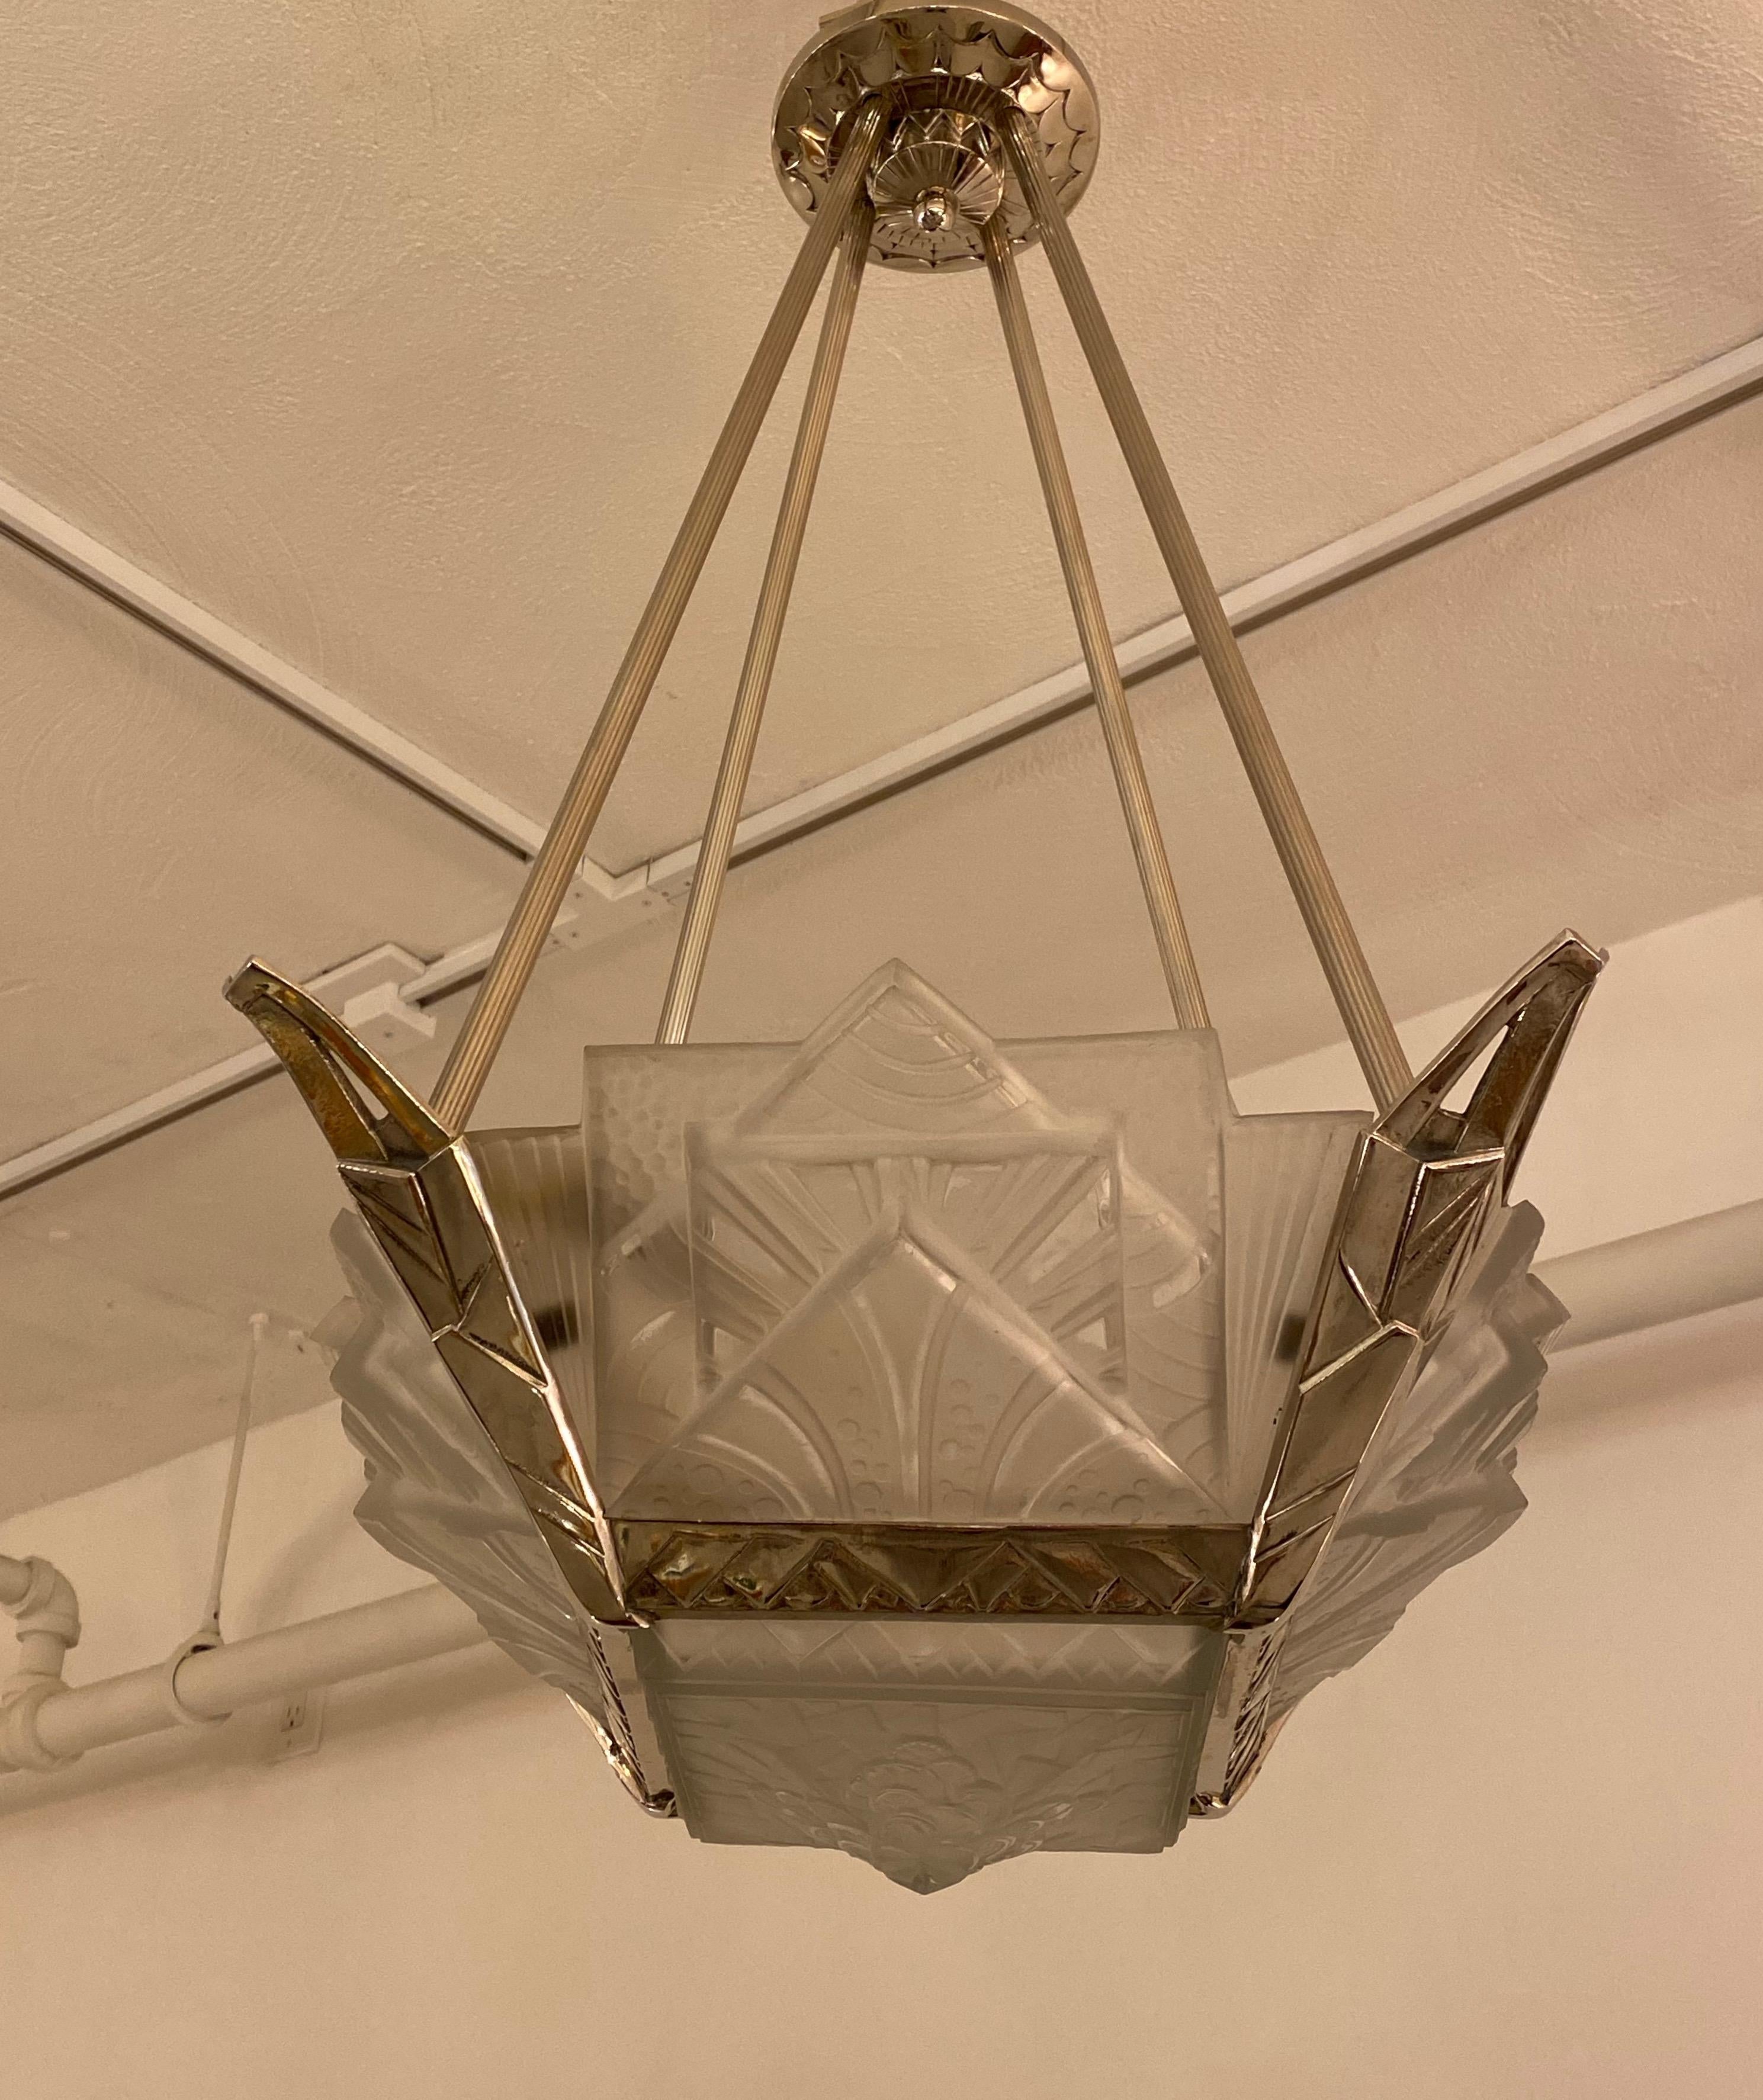 Stunning French Art Deco geometric chandelier signed by Muller Frères Luneville. Having clear frosted glass with over flowing geometric motif details. Supported by matching layered multi-tiered, geometric design polished nickel frame. Has been